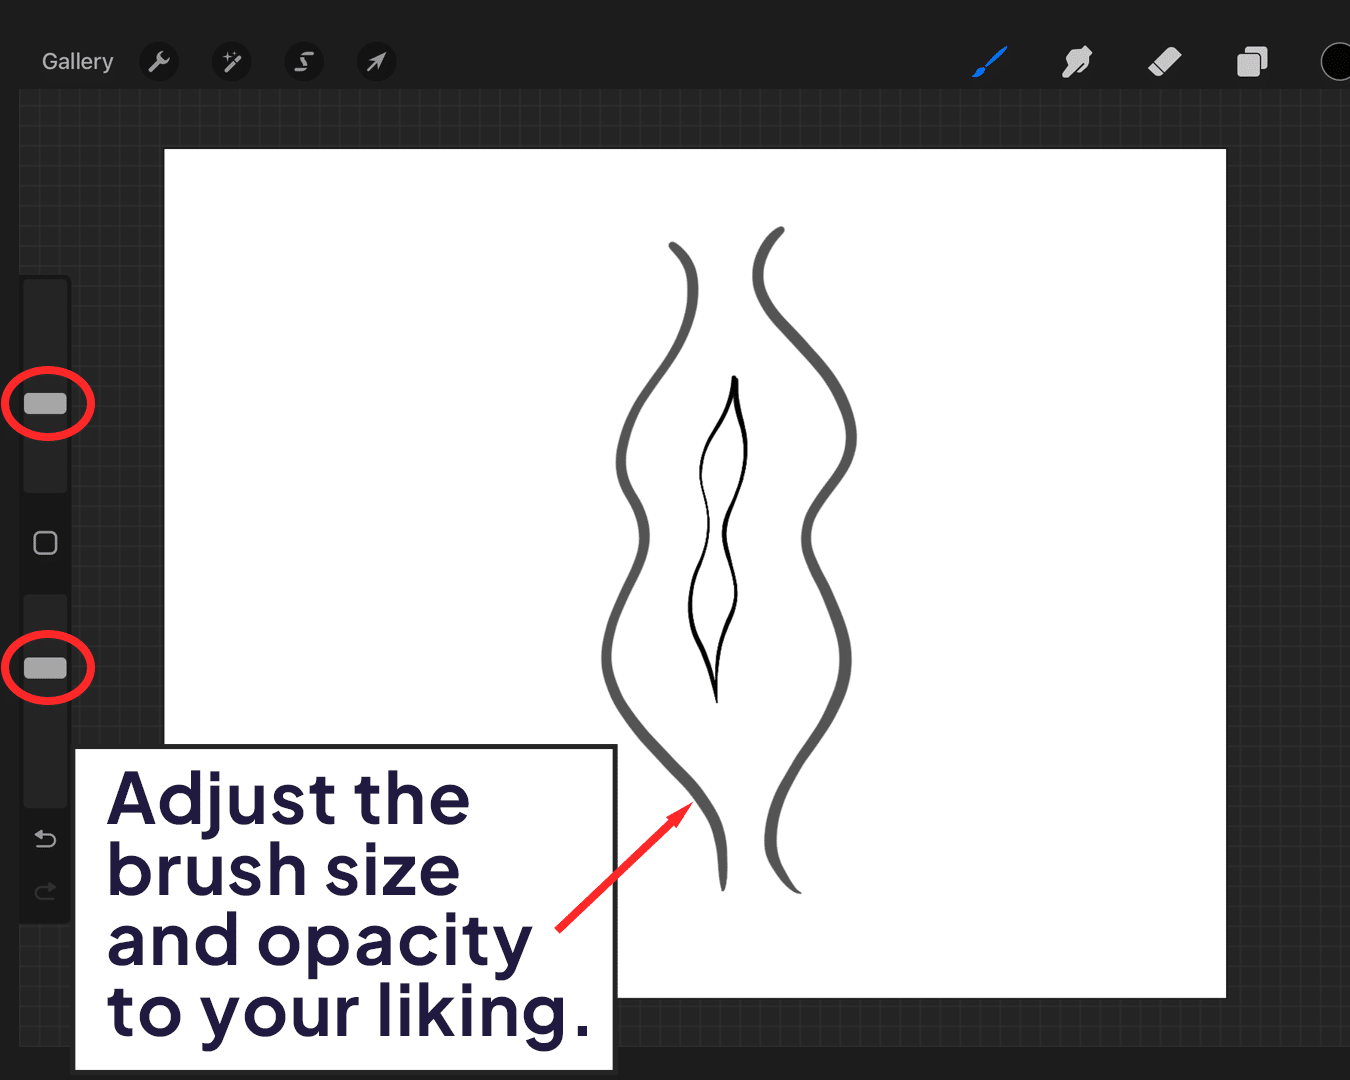 Adjusting the brush size and opacity